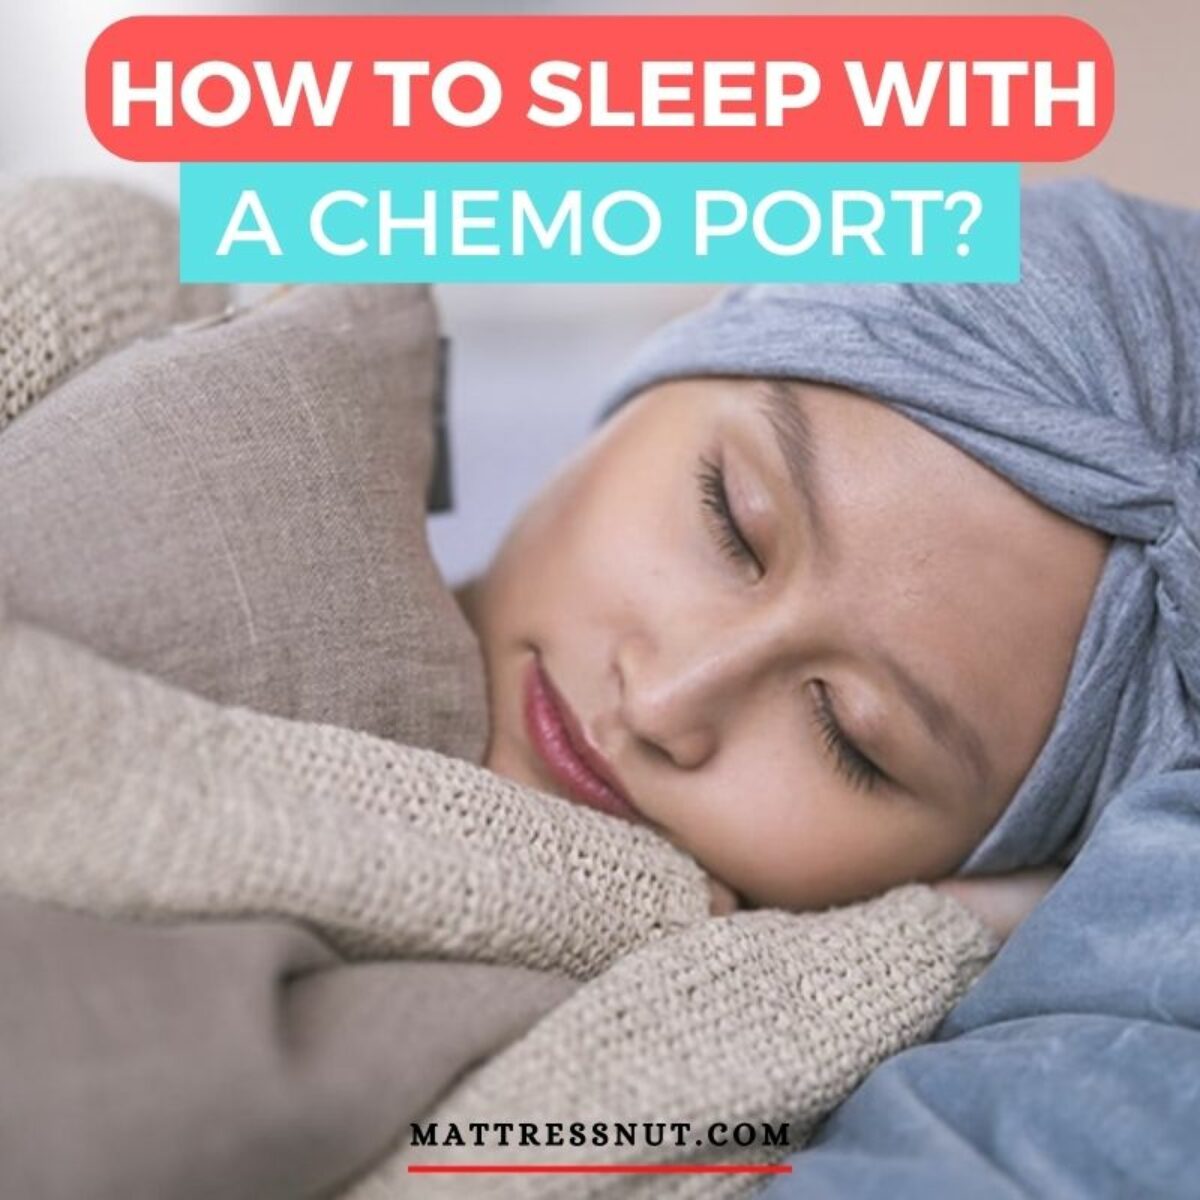 How to Sleep with a Chemo Port